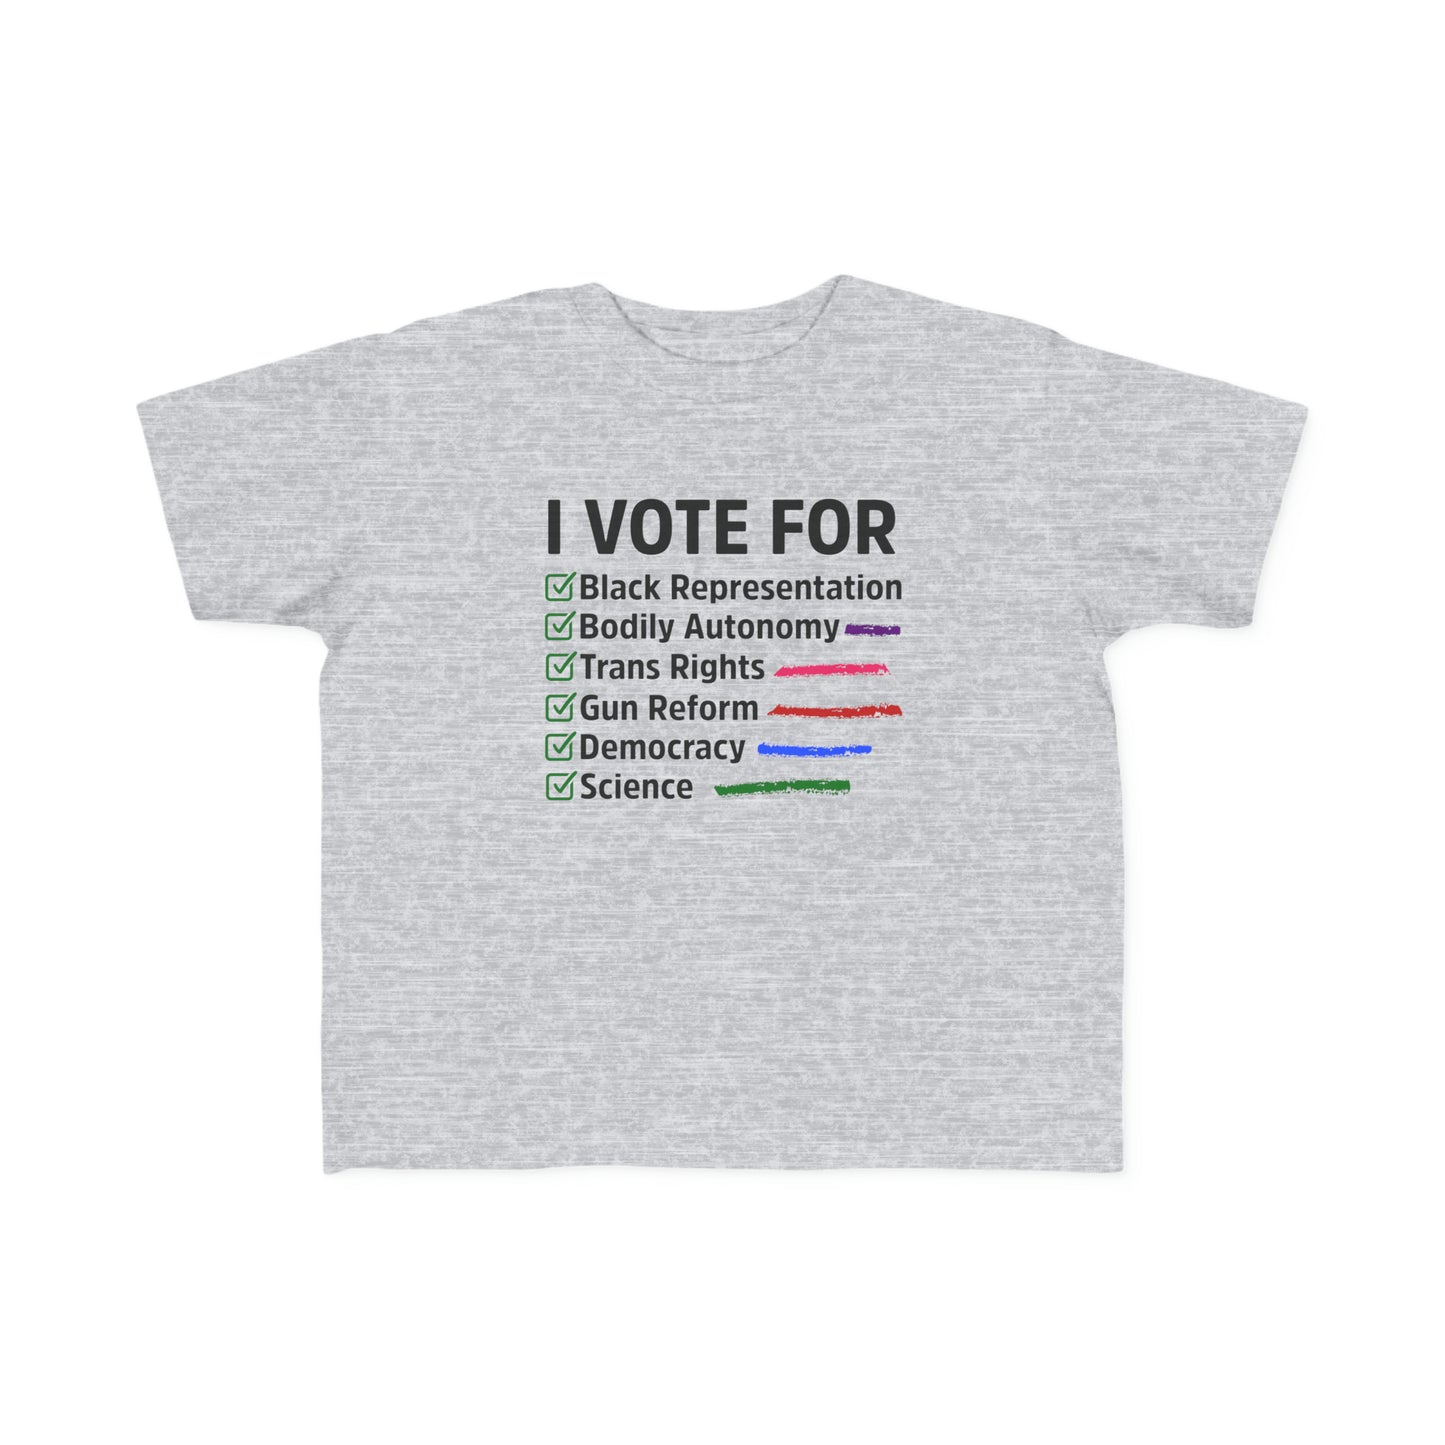 “I Vote For” Toddler's Tee